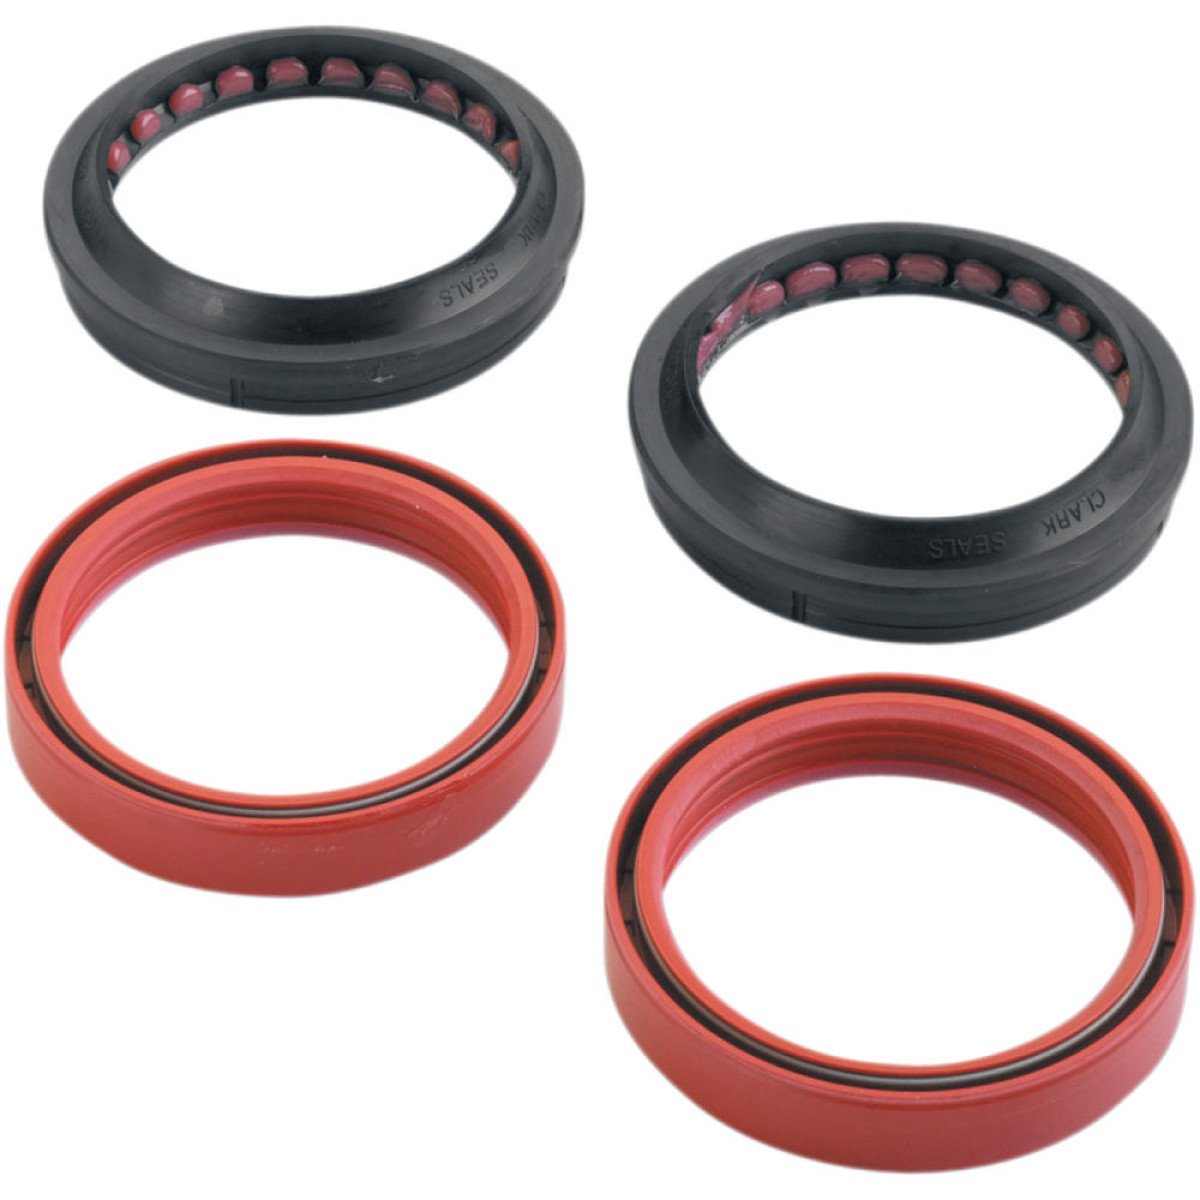 Moose Racing Fork Seal Kit with Dust Cap,  KTM SX 50/65 12-16, 35 x 46 x 11 mm